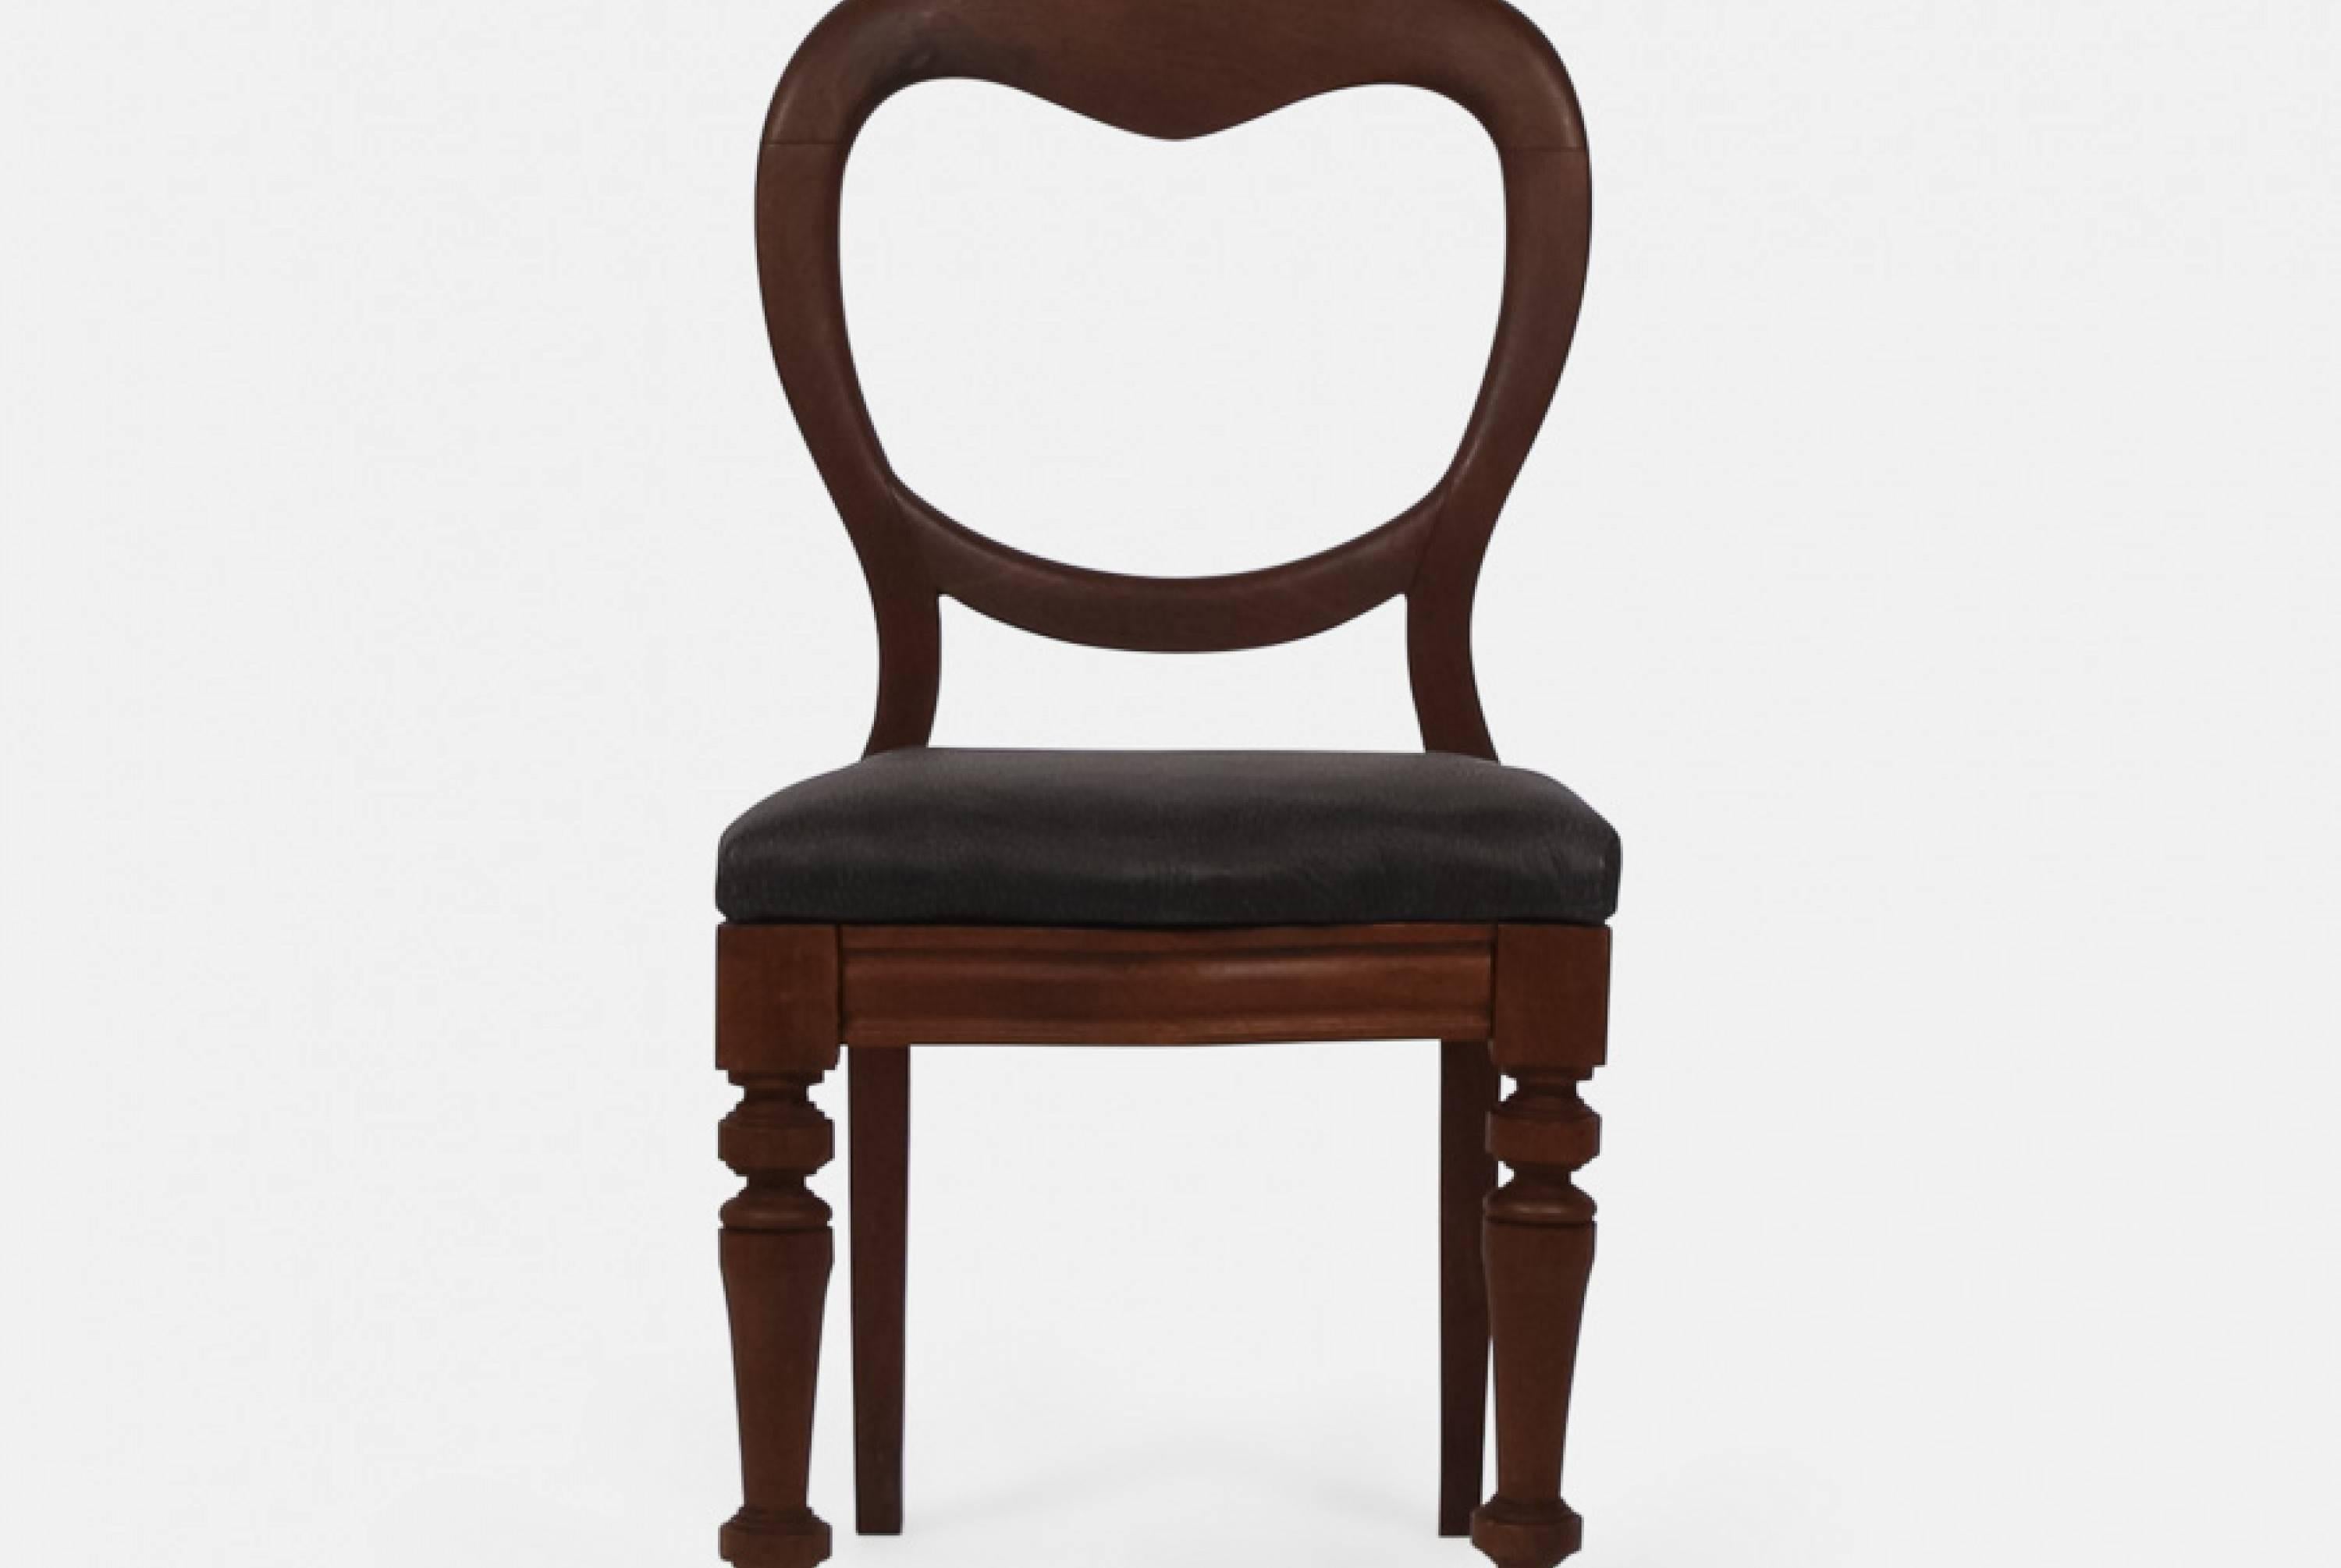 A set of six antique mahogany balloons back dining chairs with black leather seats.
The seat pads have been newly recovered in Andrew Martin black leather.